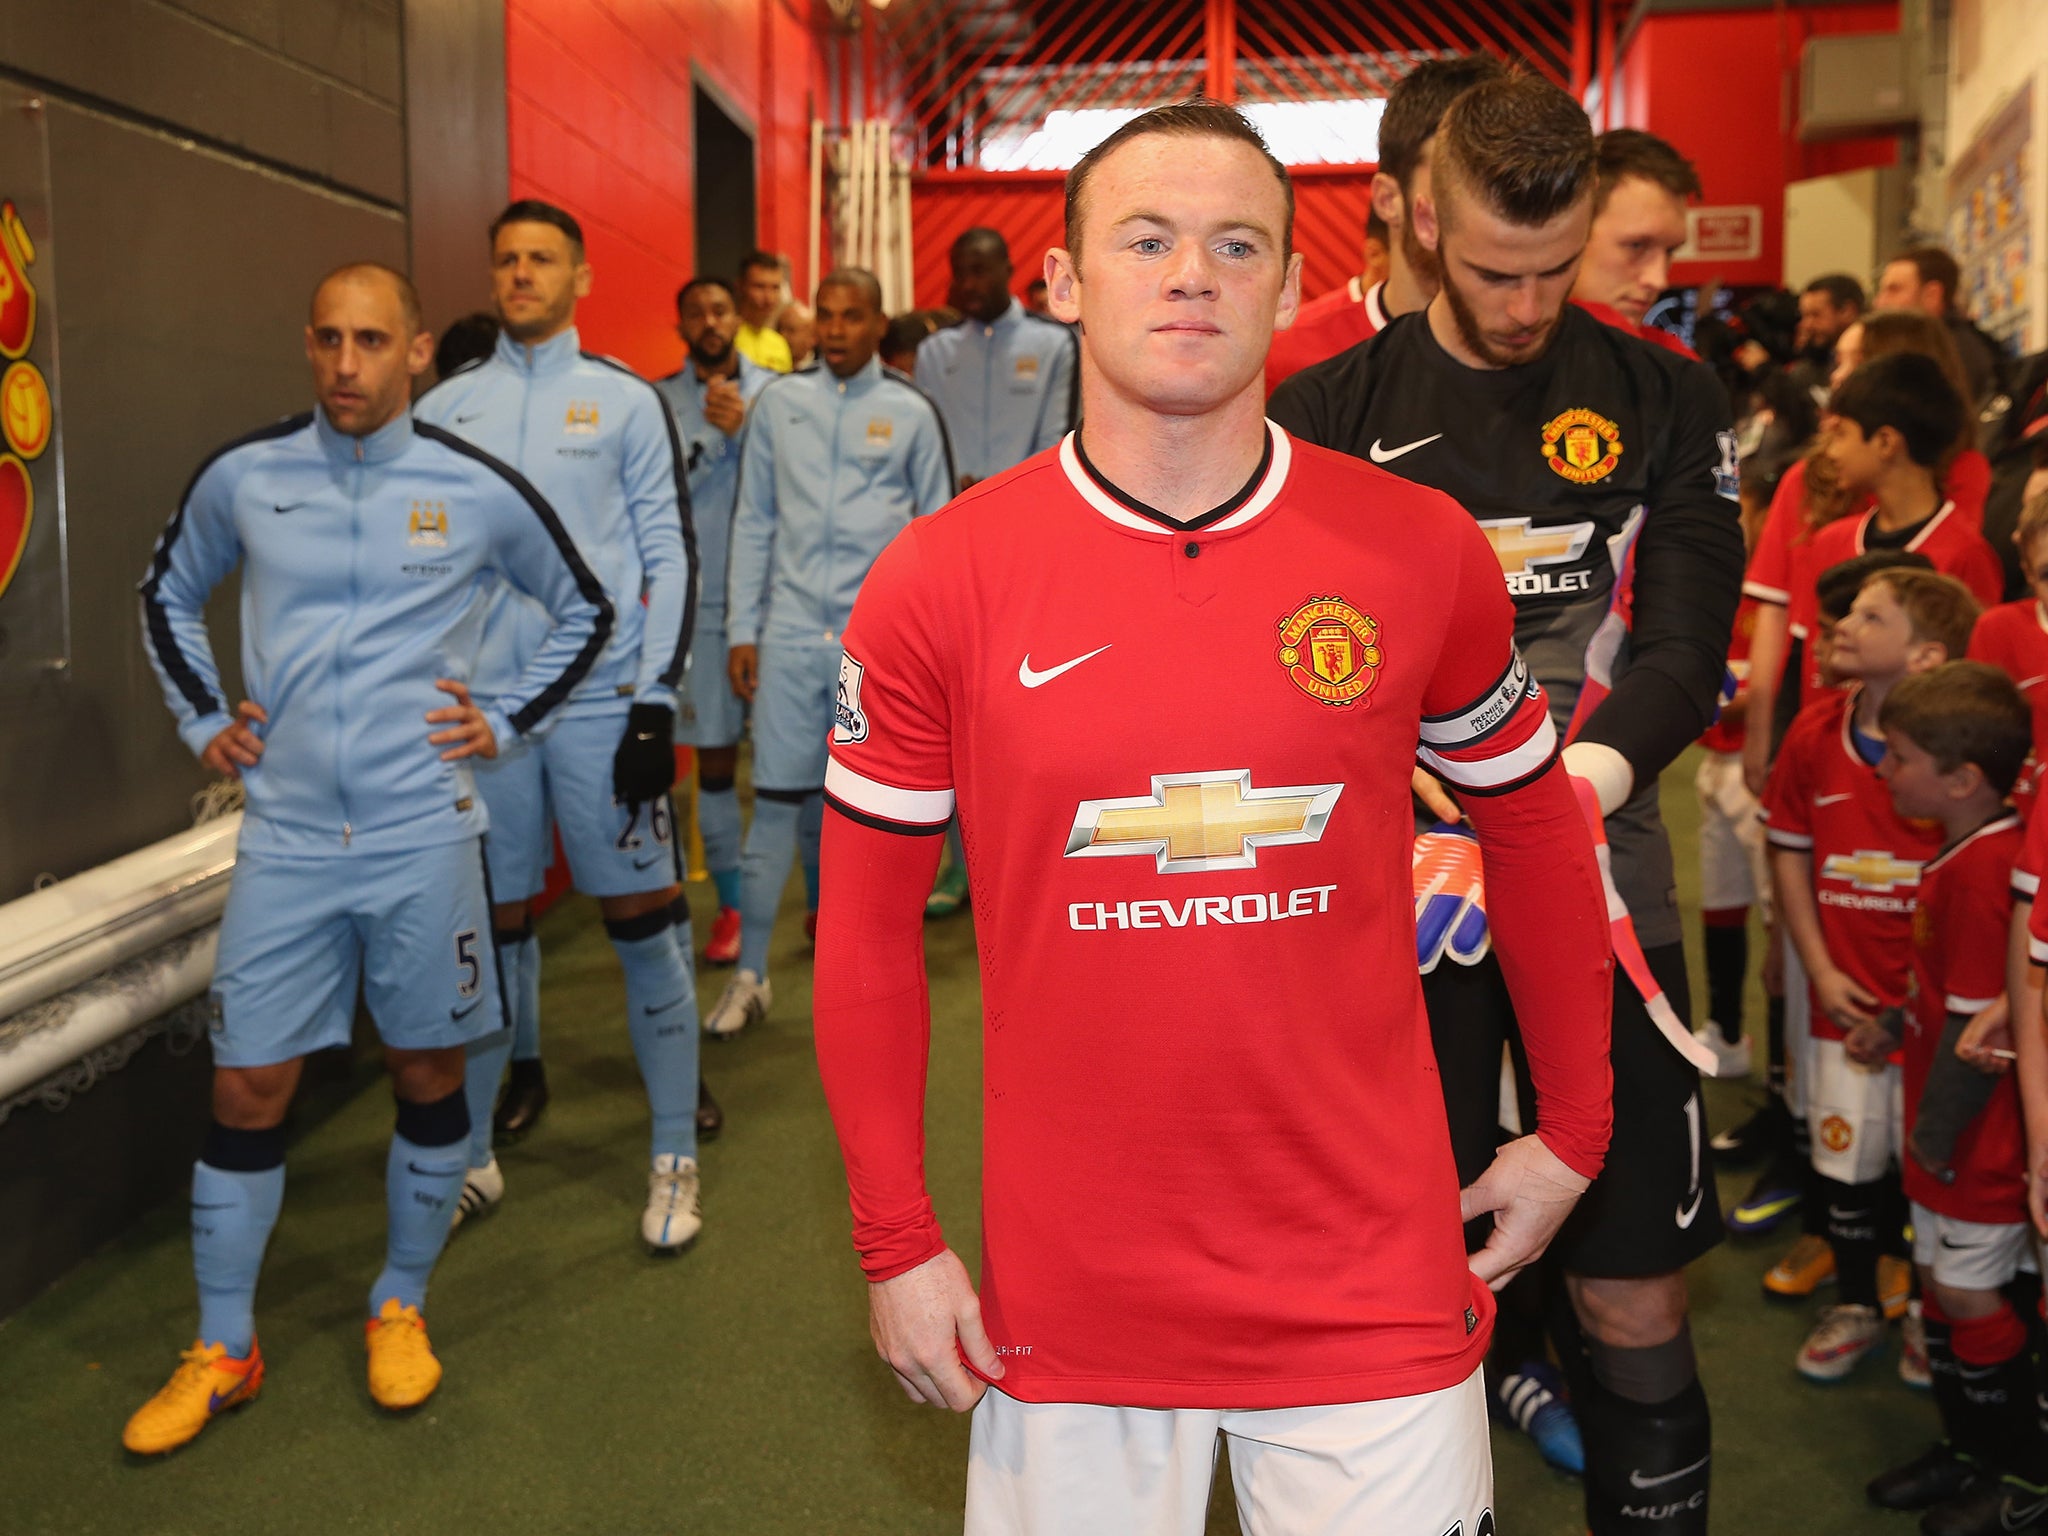 Manchester United captain Wayne Rooney ahead of the match with Manchester City